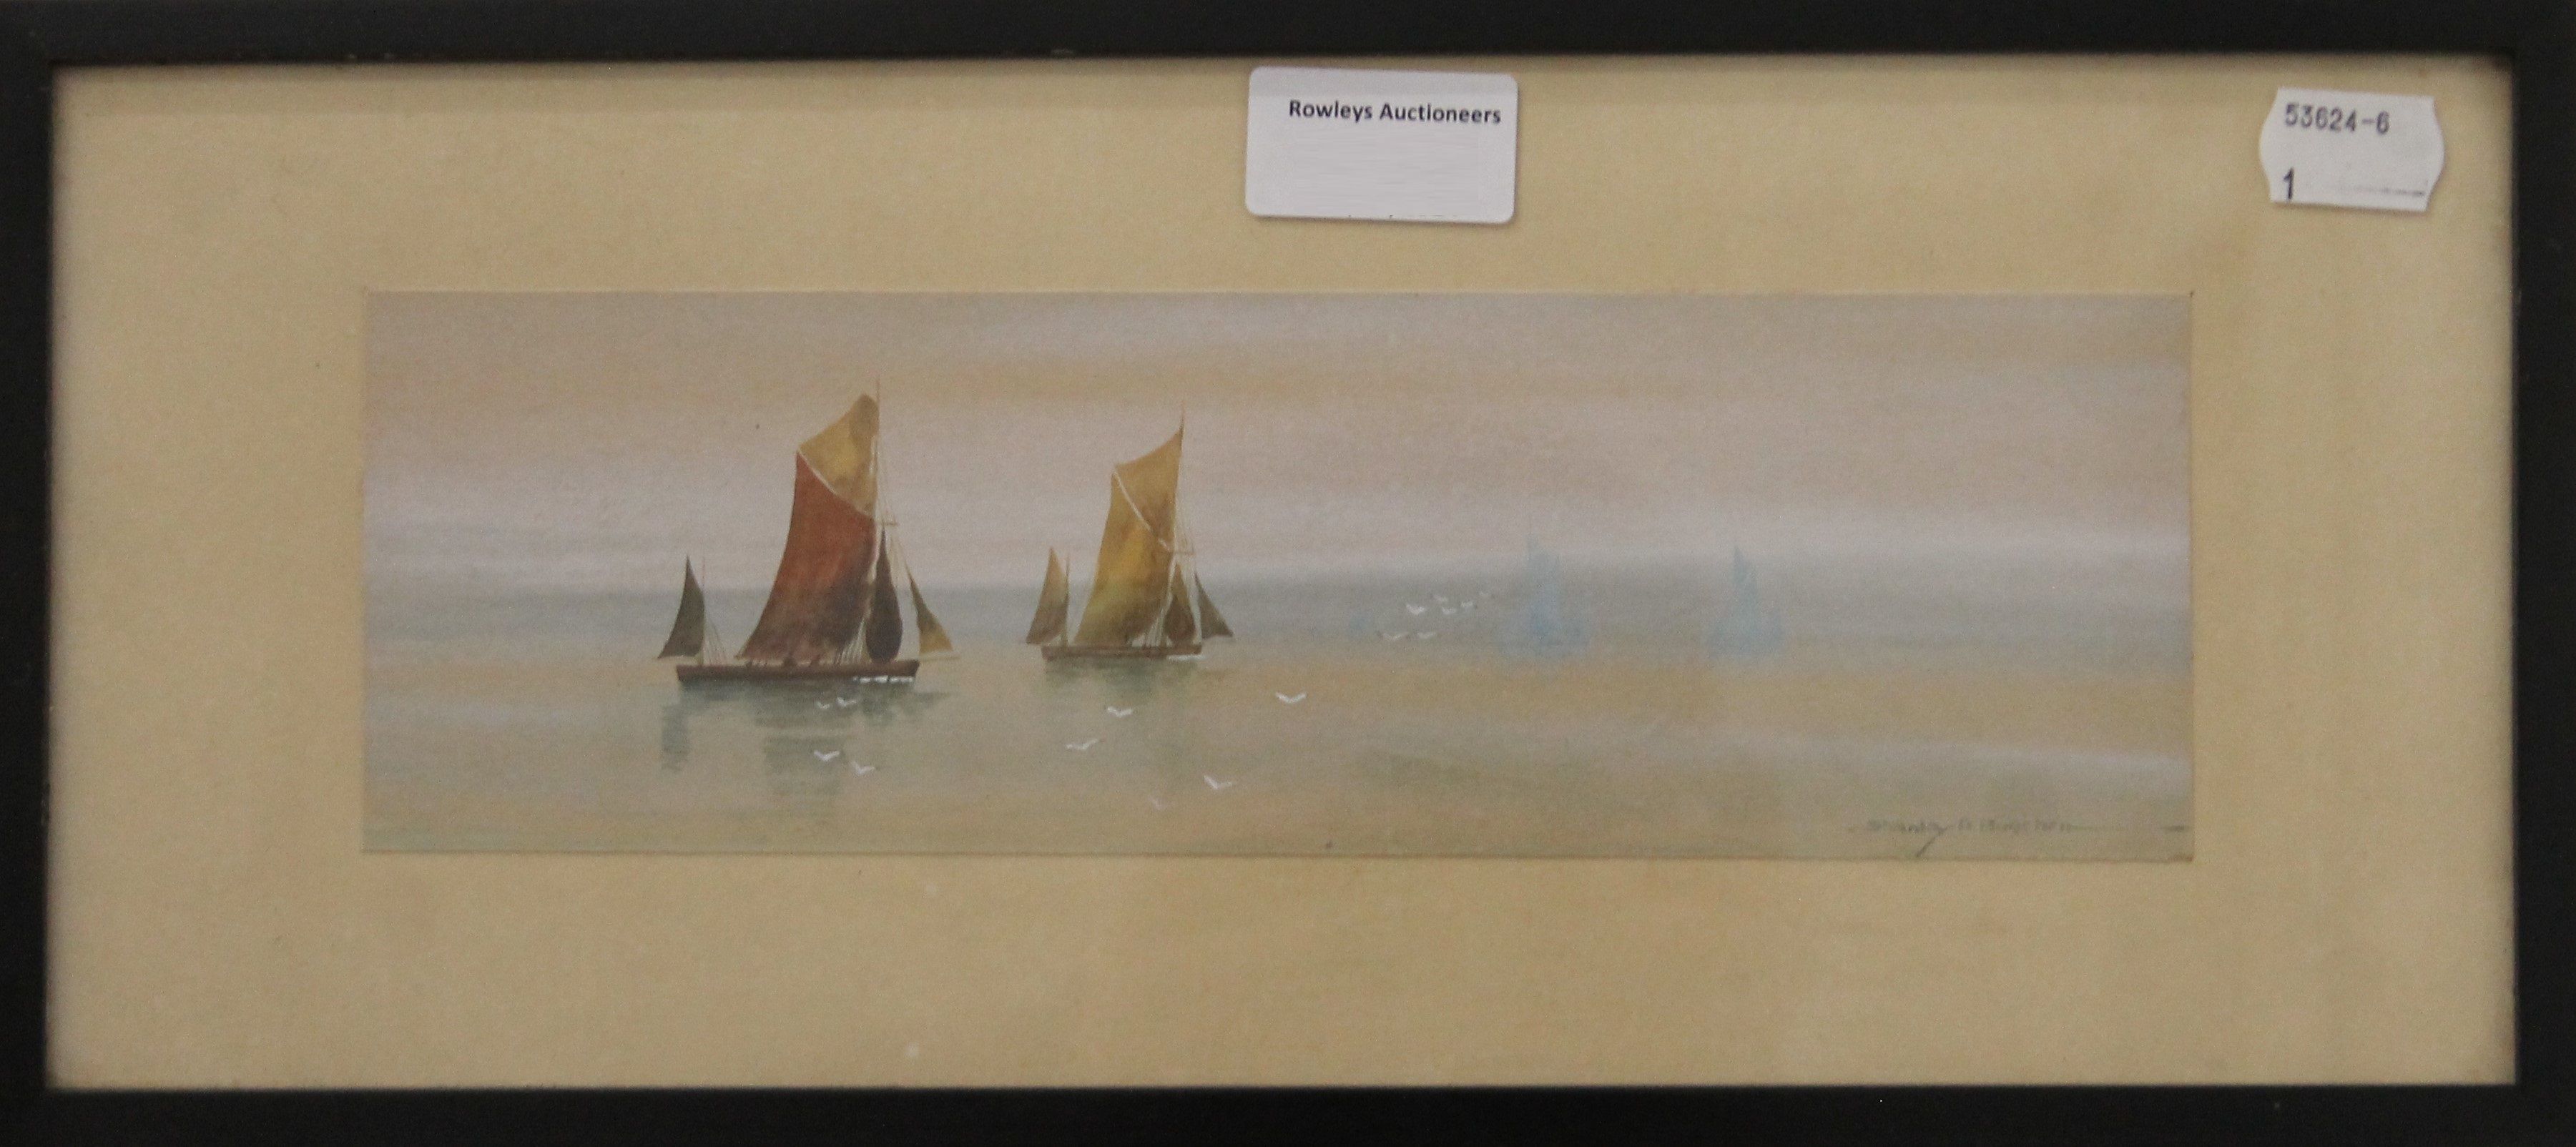 STANLEY R BURCHETT, Boats in Calm Waters, circa 1920's, watercolour, framed and glazed. 8 x 26 cm. - Image 2 of 3